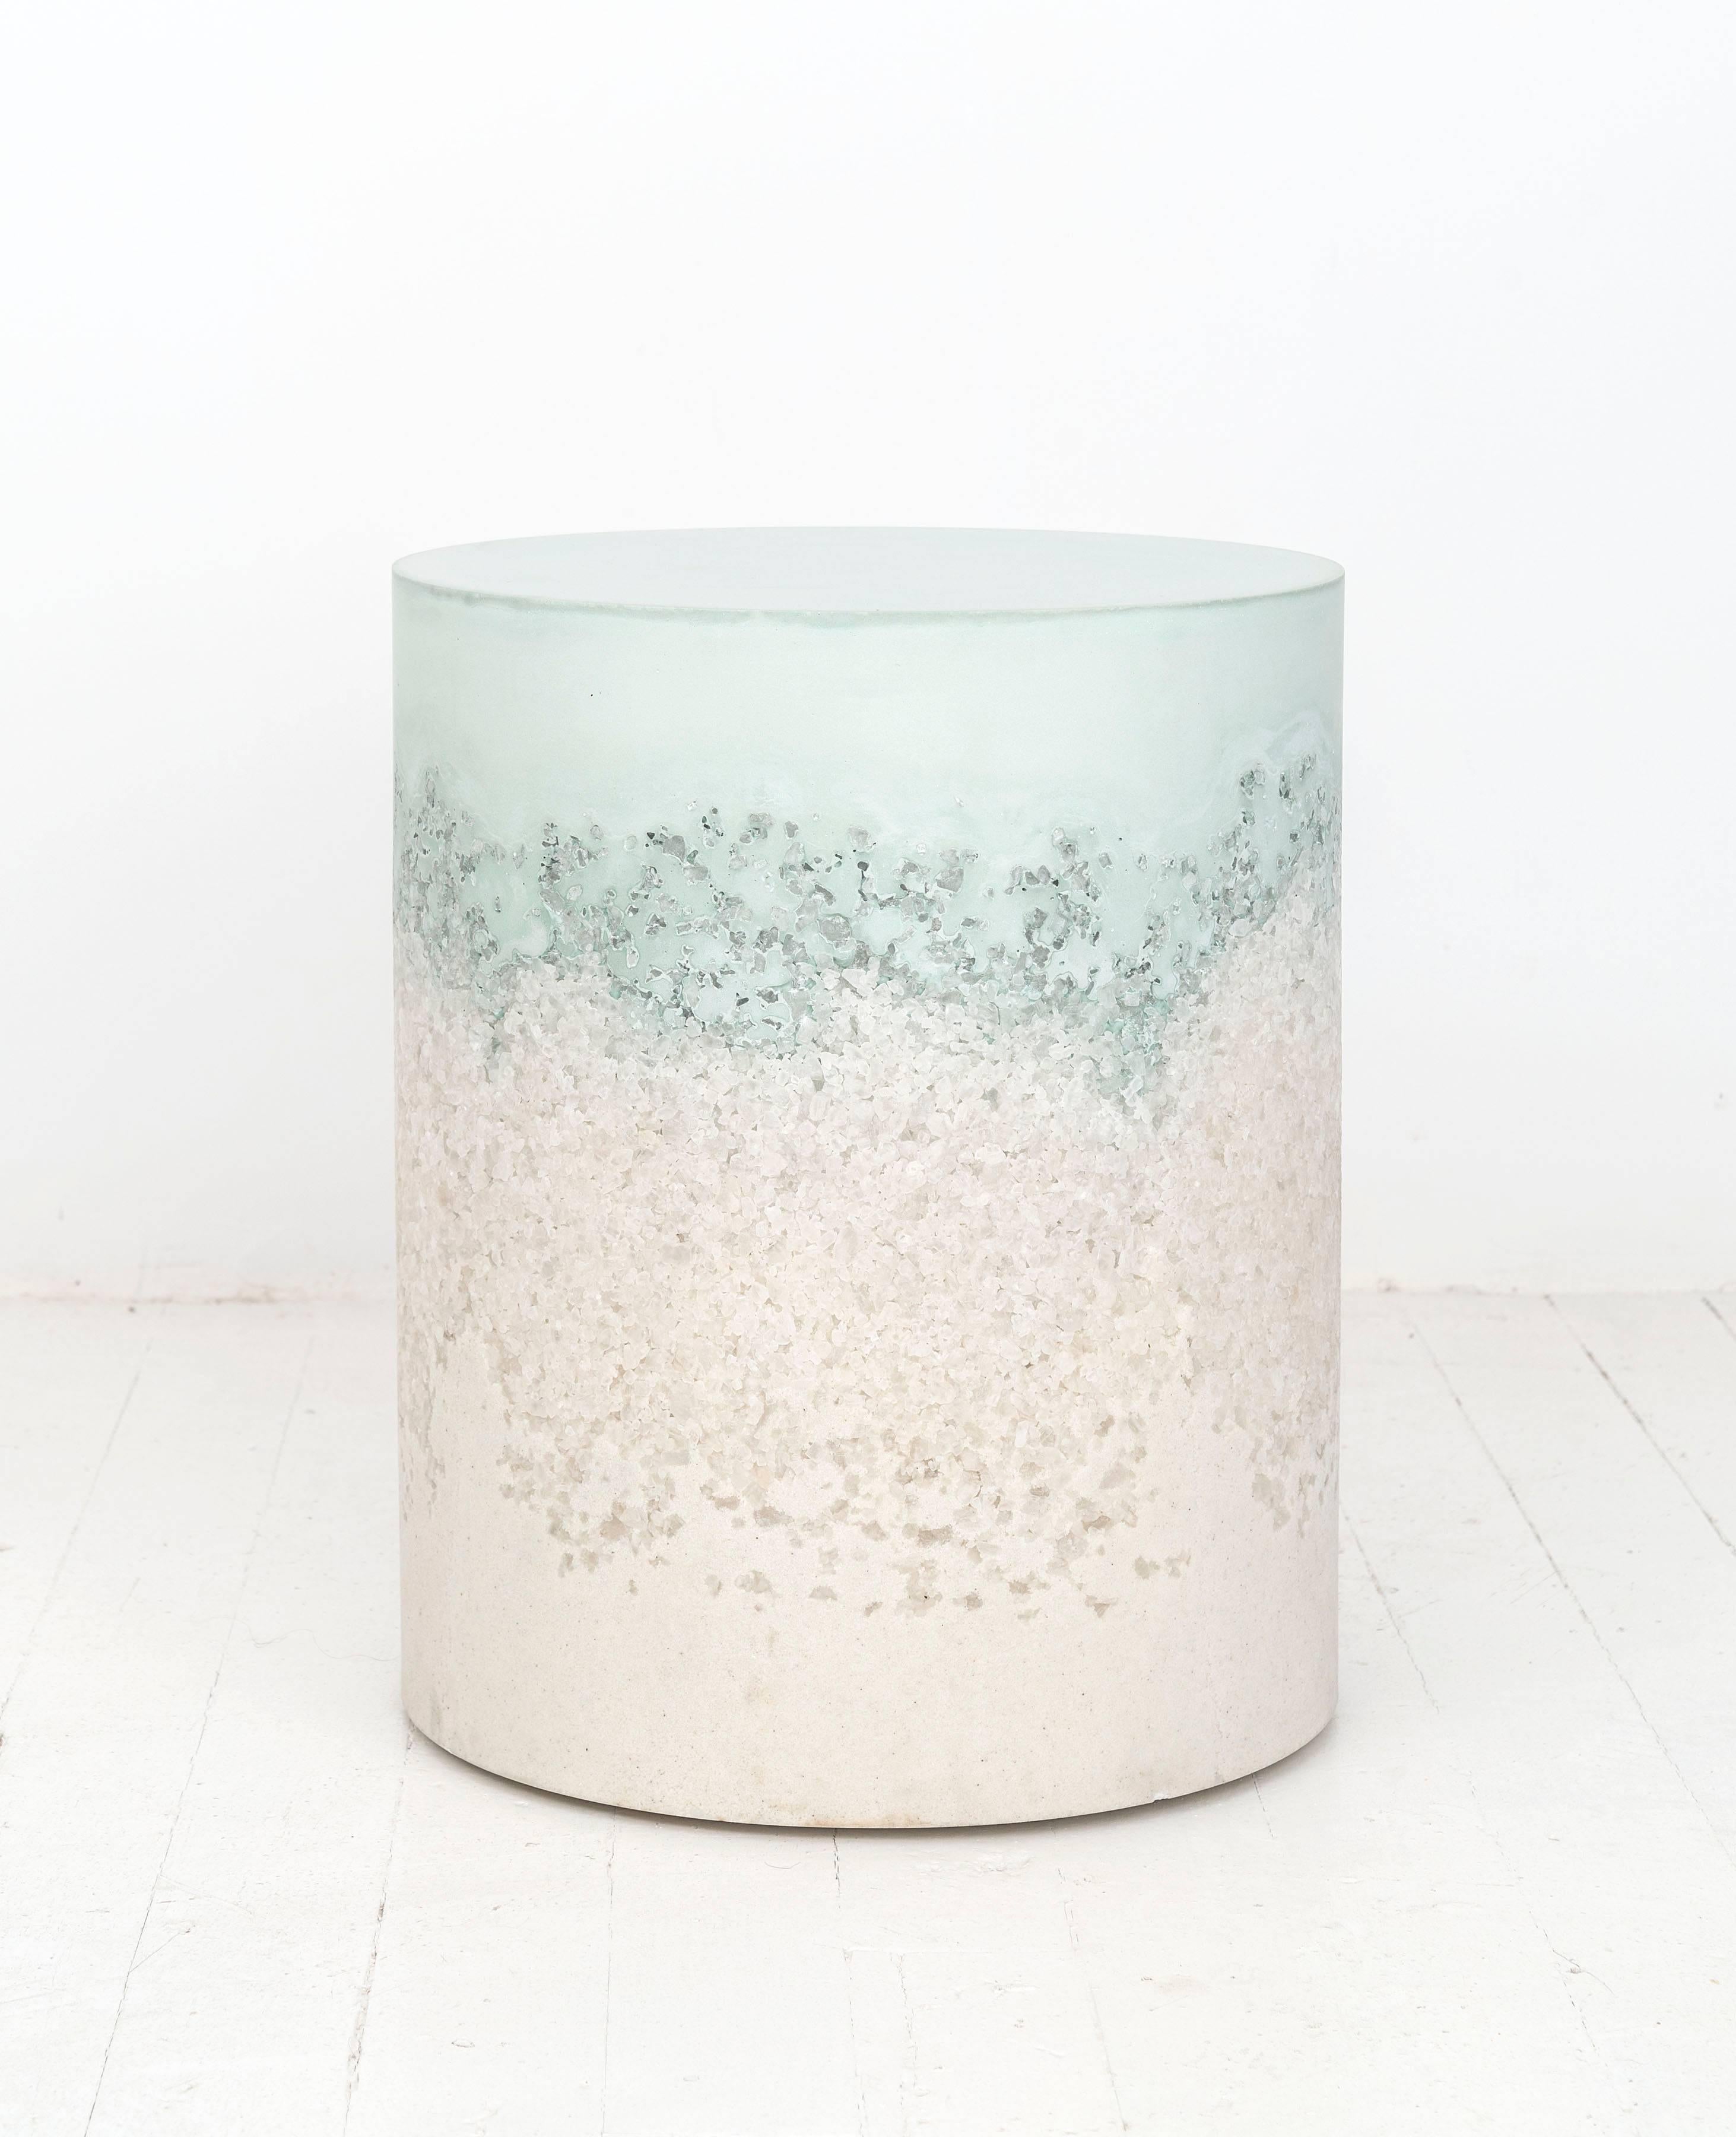 A layering of cement and crushed aggregates, the made-to-order drum consists of an hand-dyed celadon cement top and a packed white rock salt bottom. Poured by hand over the jagged minerals, the celadon cement merges the materials to create a unique